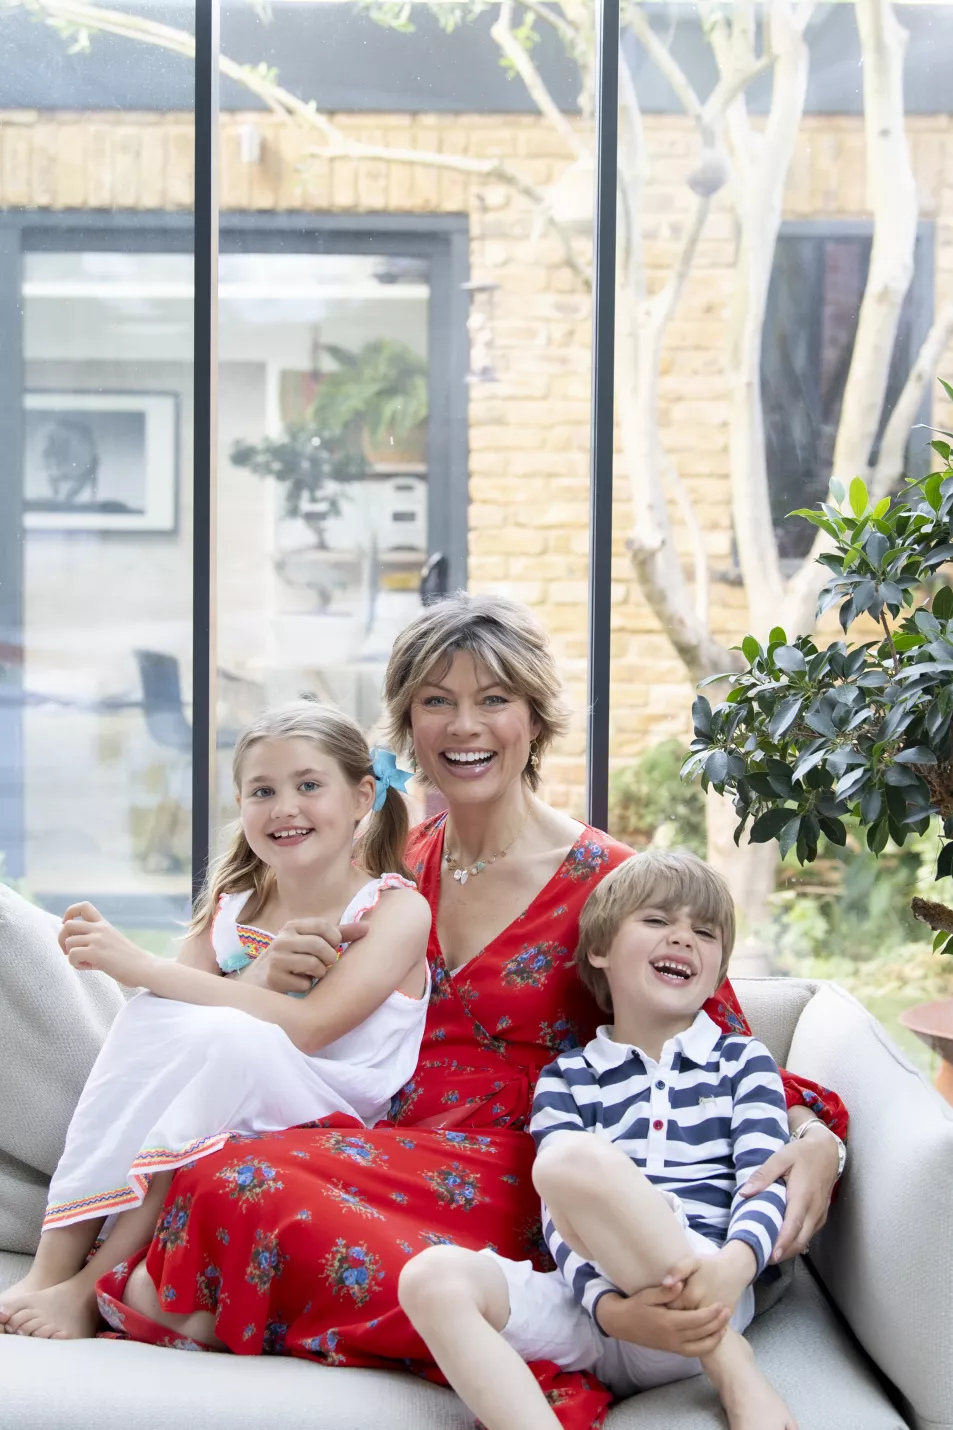 Kate Silverton with her children Clemency and Wilbur